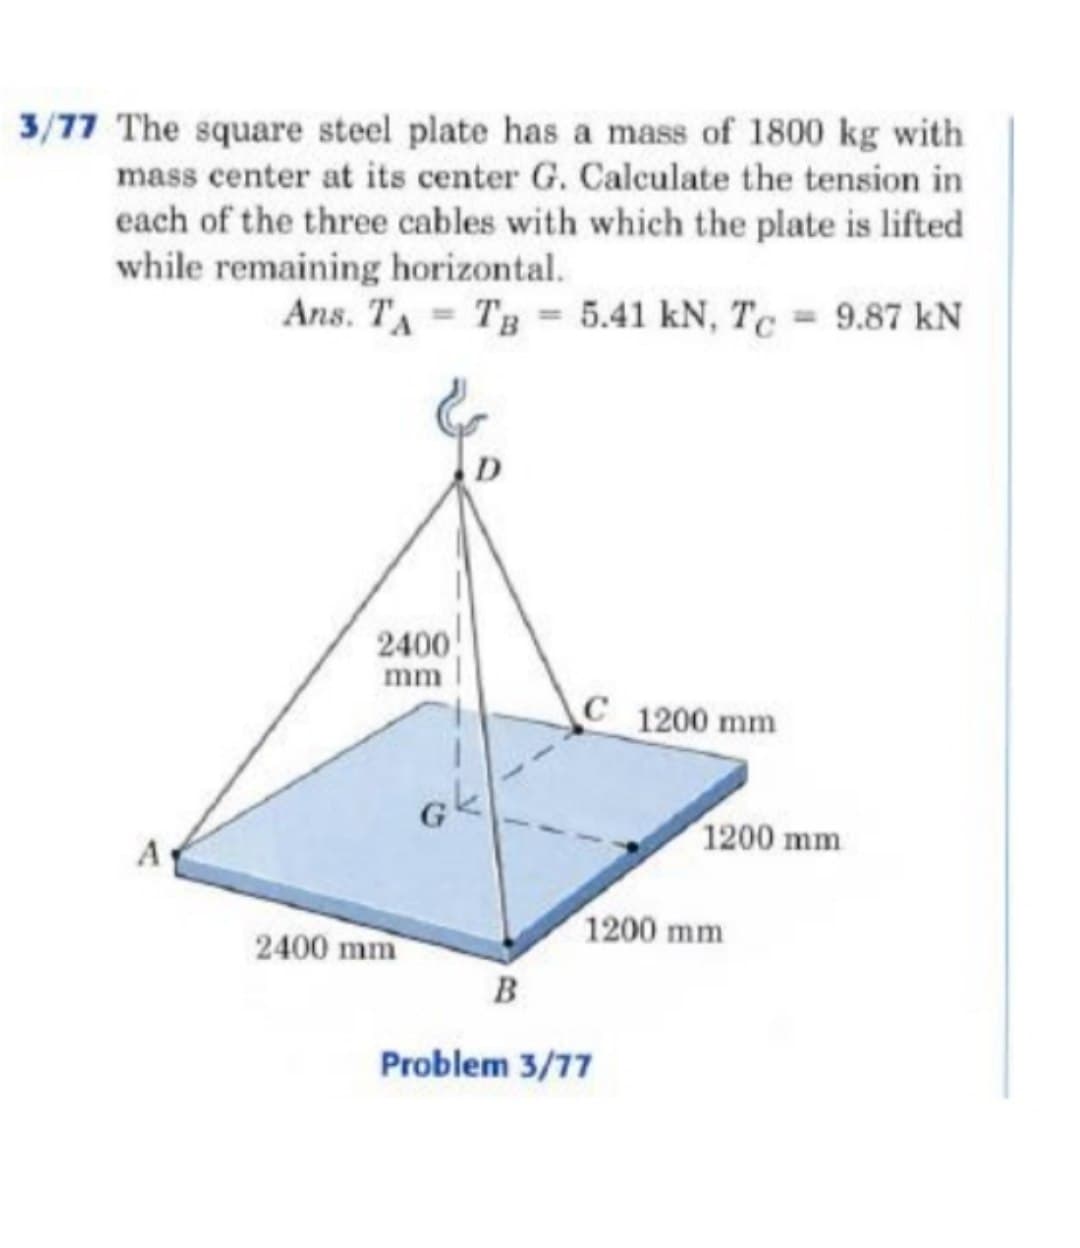 3/77 The square steel plate has a mass of 1800 kg with
mass center at its center G. Calculate the tension in
each of the three cables with which the plate is lifted
while remaining horizontal.
Ans. TA TB 5.41 kN, Tc = 9.87 kN
A
D
2400
mm
G
C 1200 mm
1200 mm
1200 mm
2400 mm
B
Problem 3/77